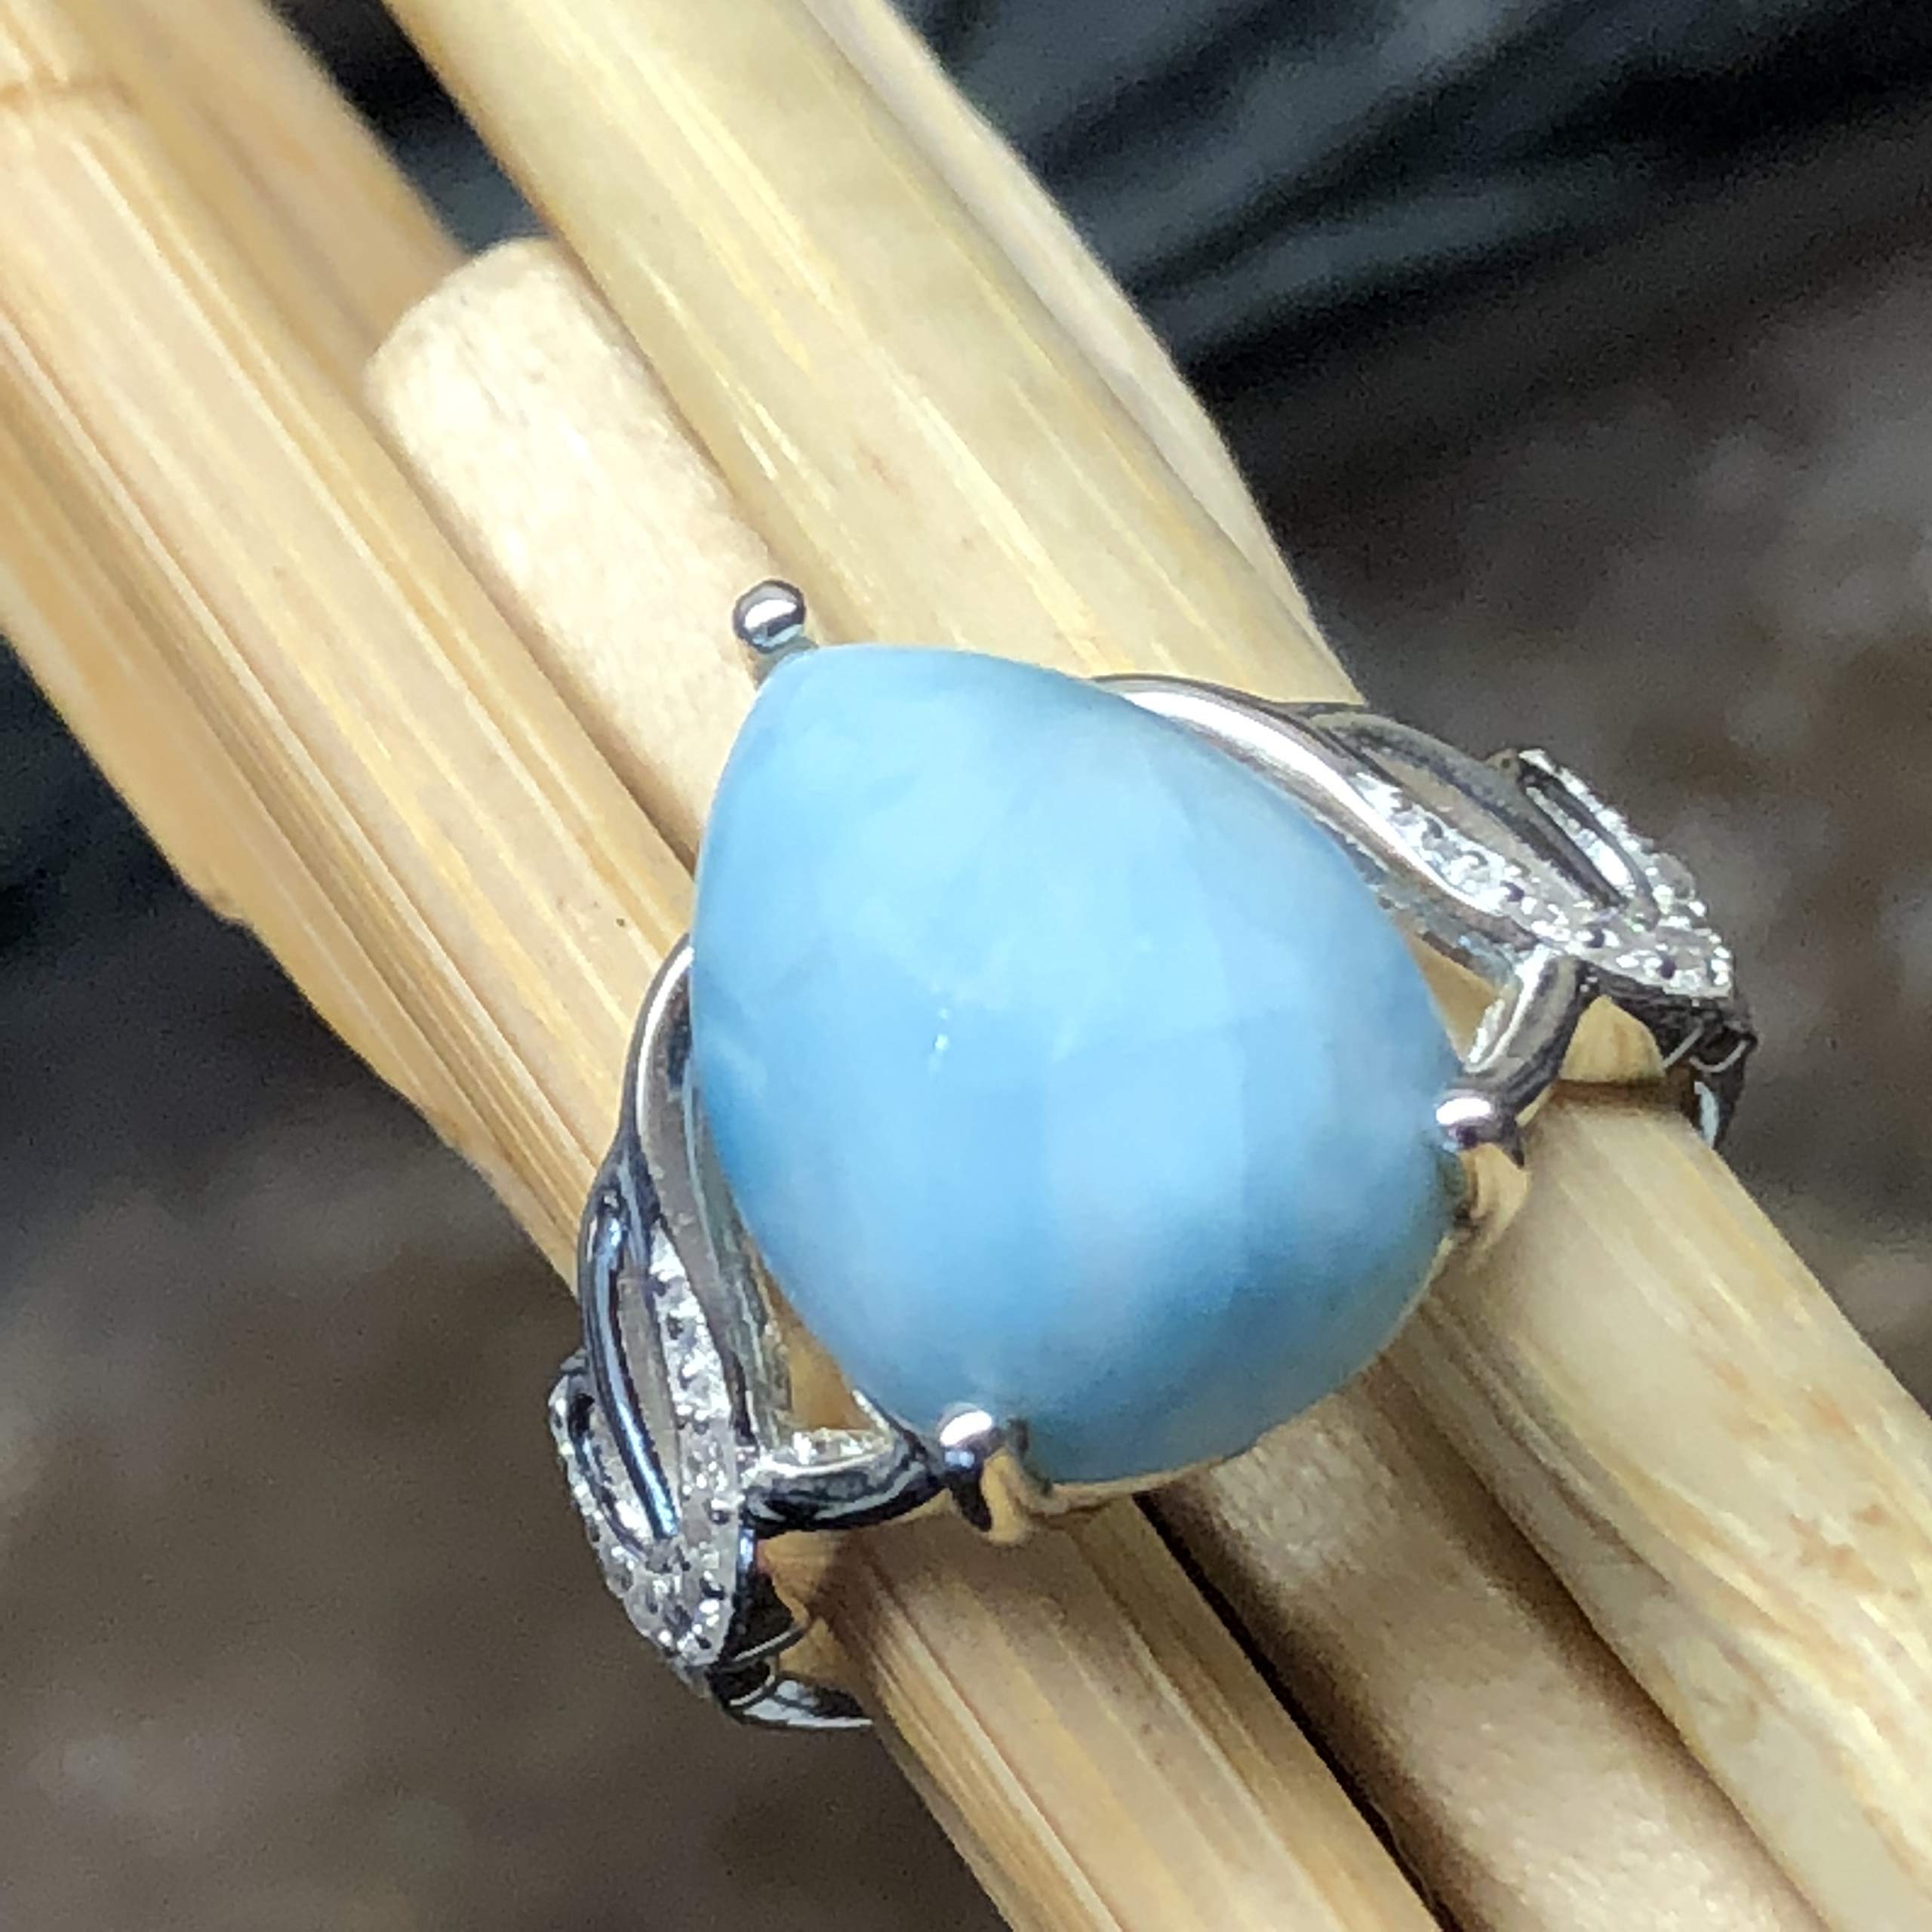 Natural Dominican Larimar 925 Solid Sterling Silver Engagement Ring Size 6, 7, 8, 9 - Natural Rocks by Kala